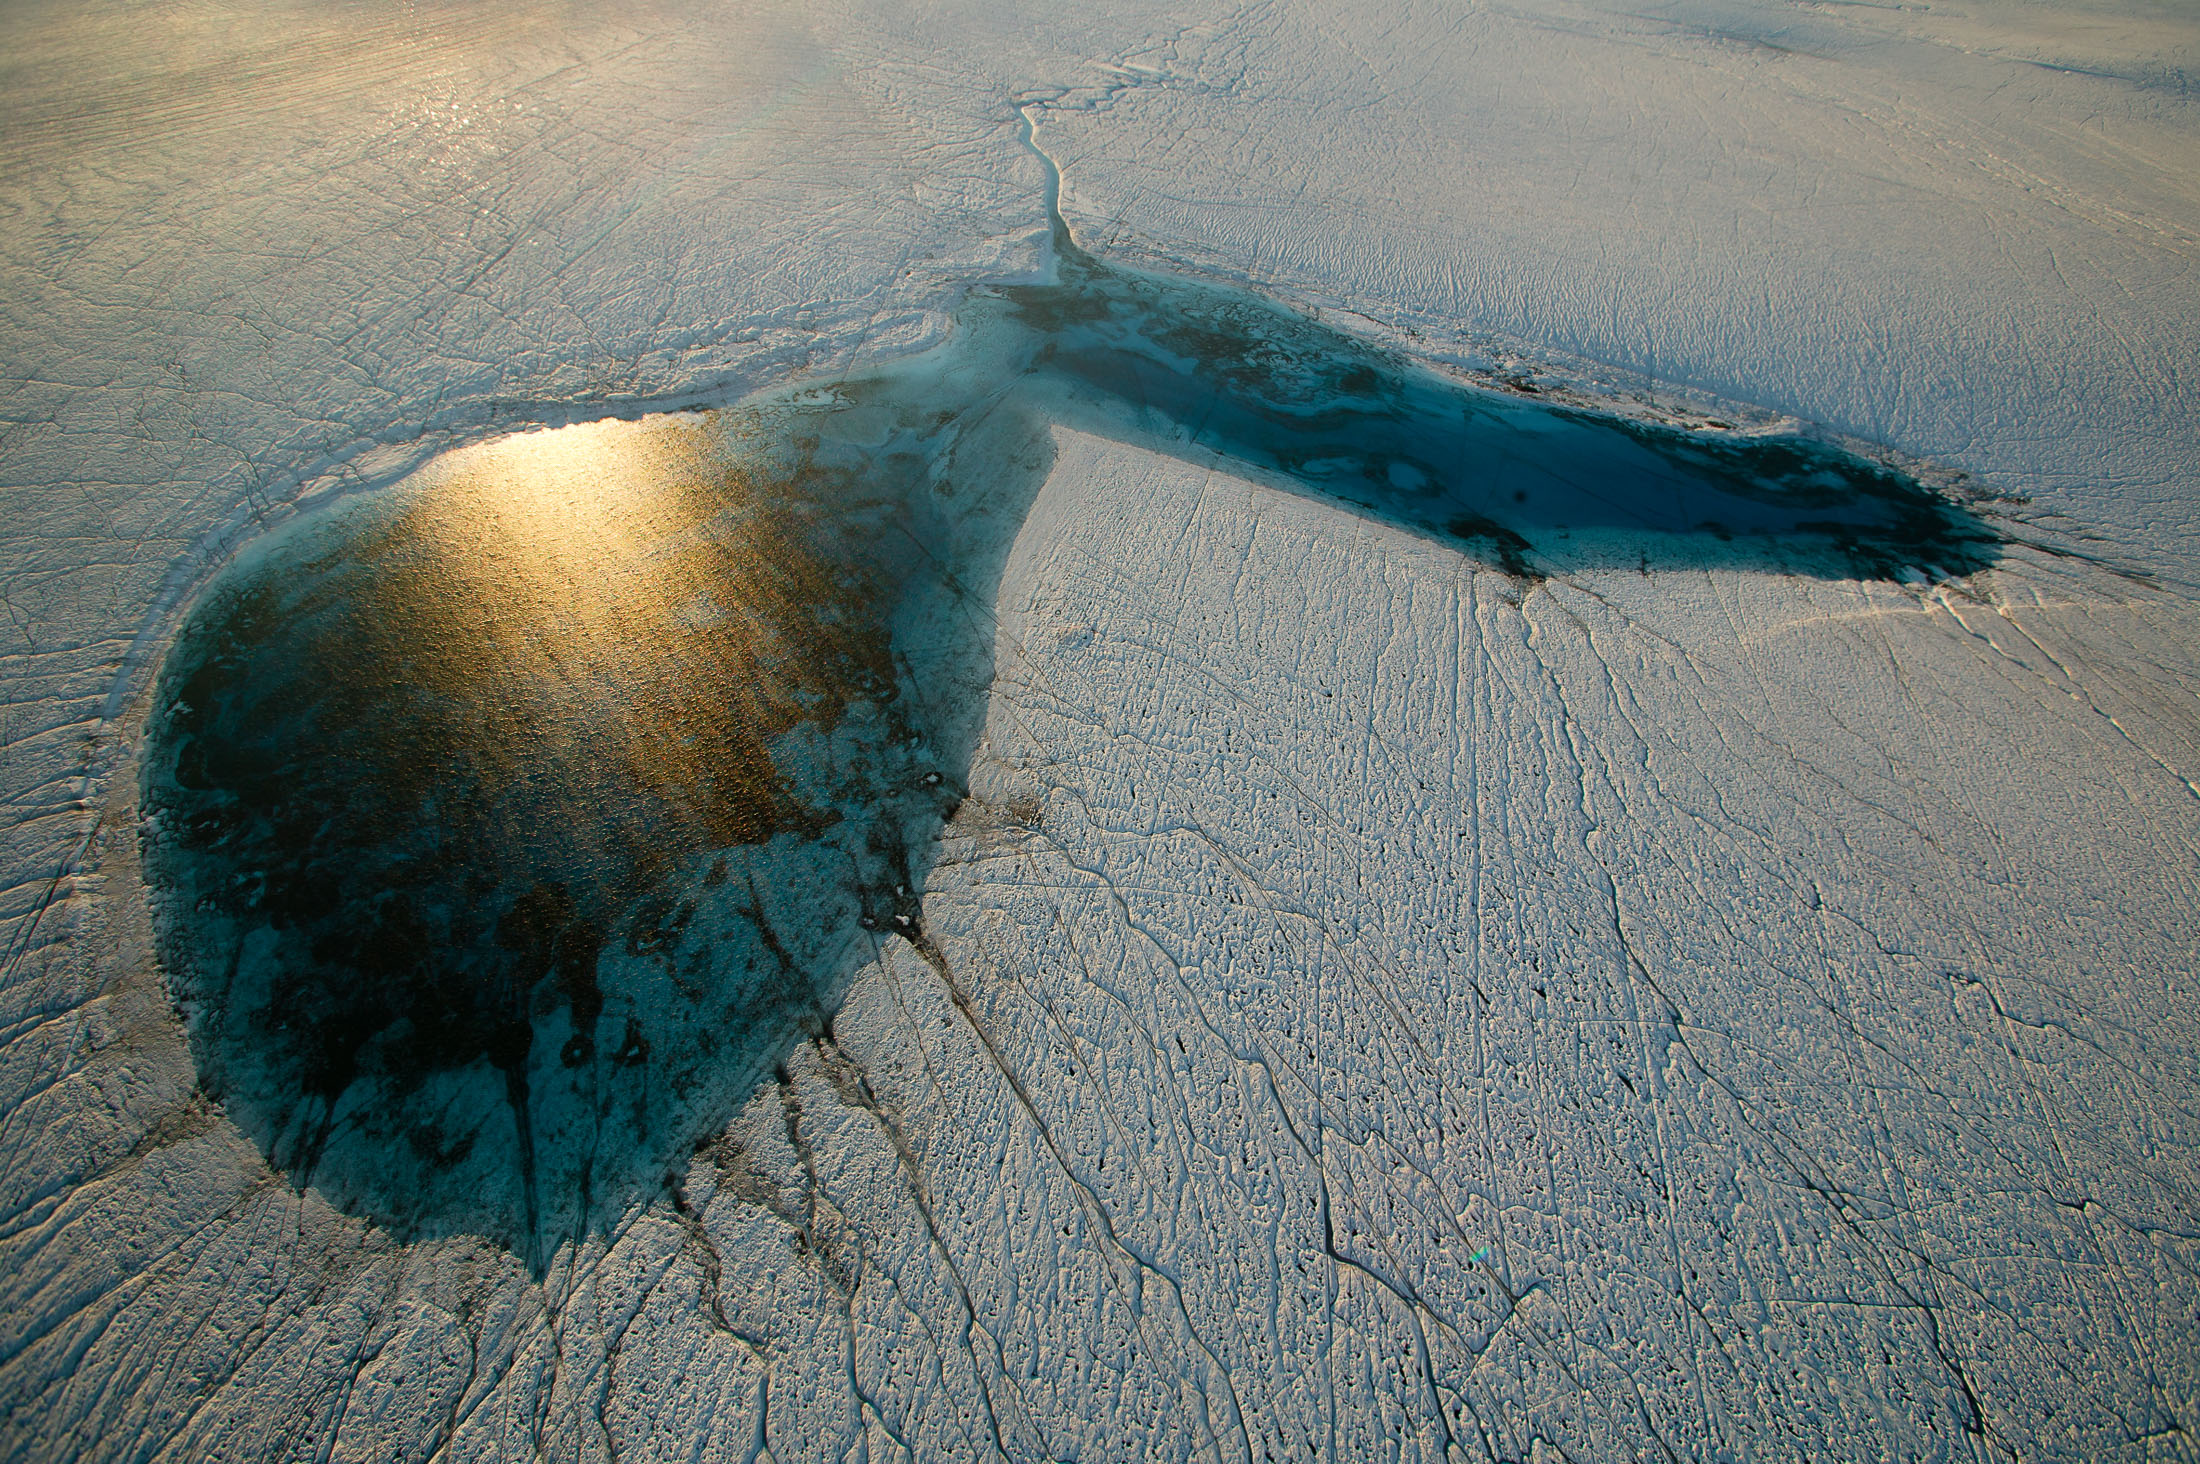 A melt lake in the shape of a heart on Greenland